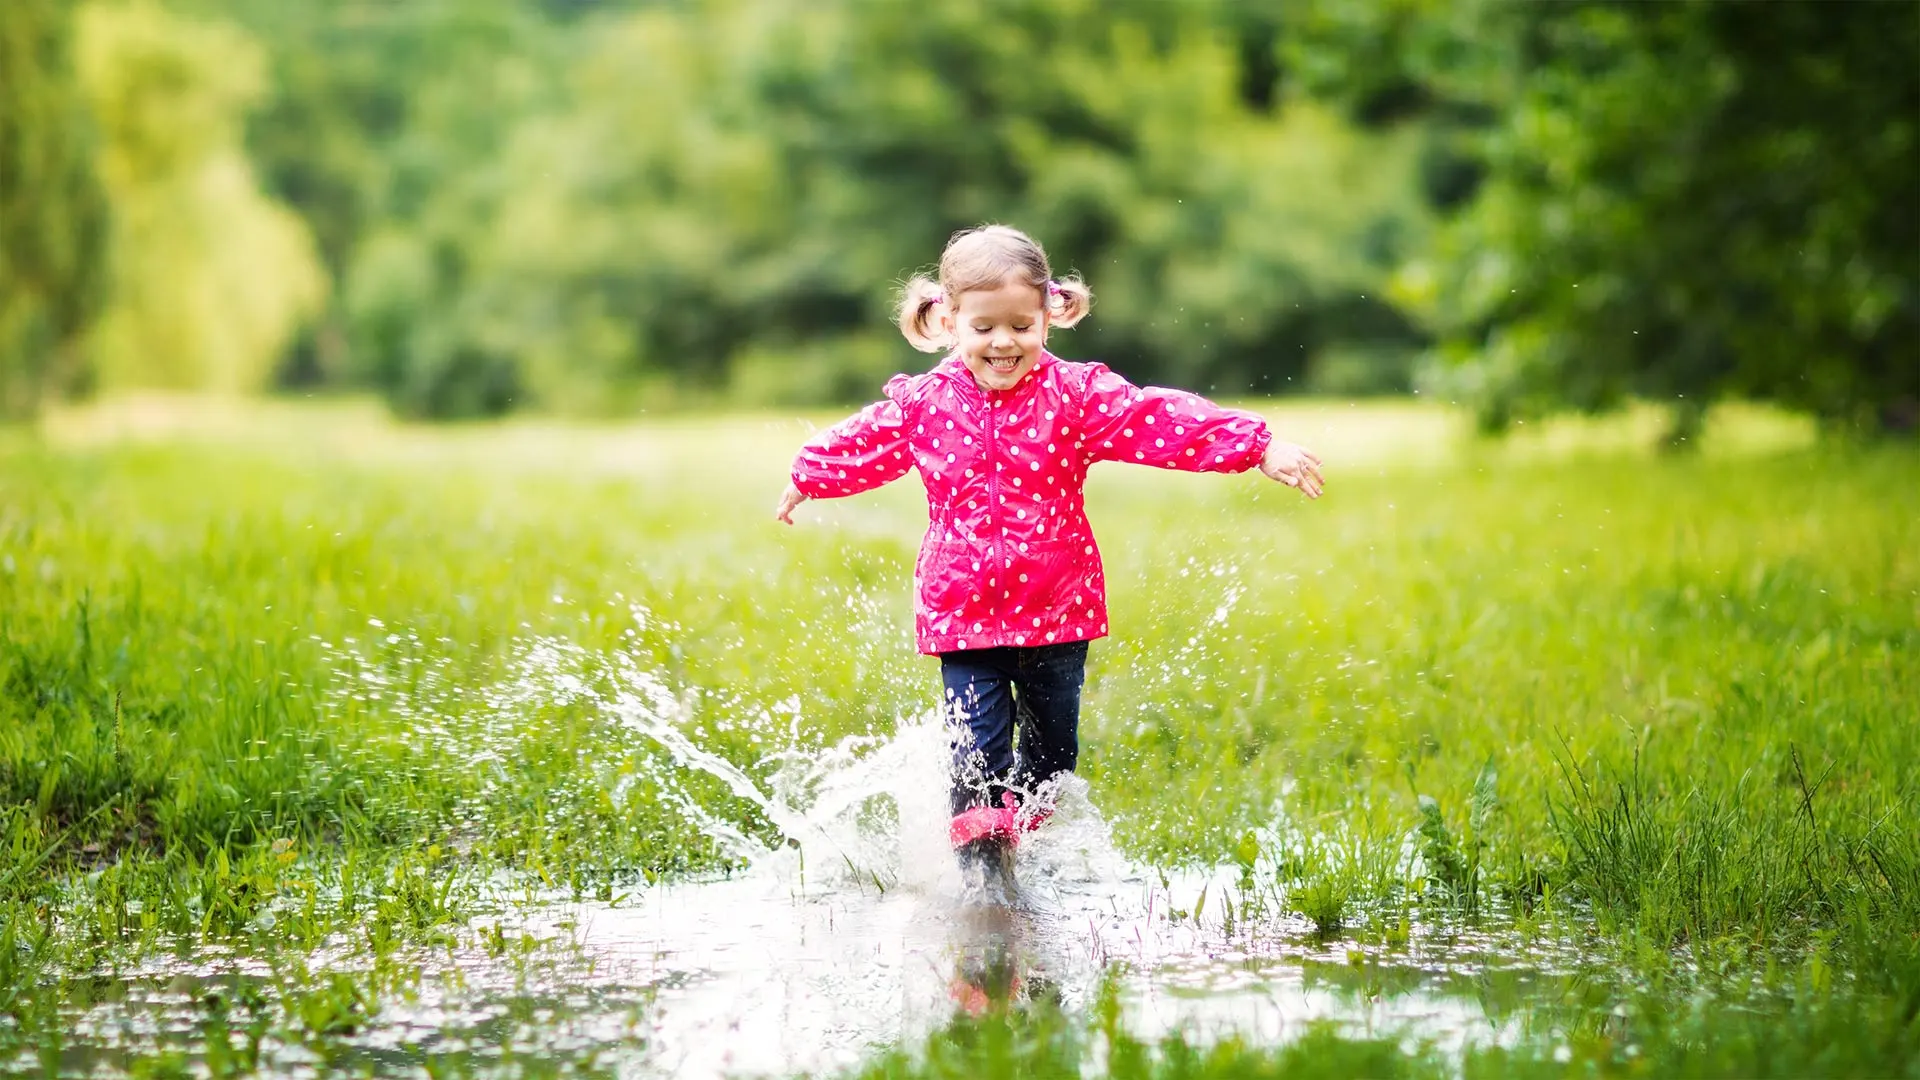 Puddles - Good for Kids, Bad for Lawns